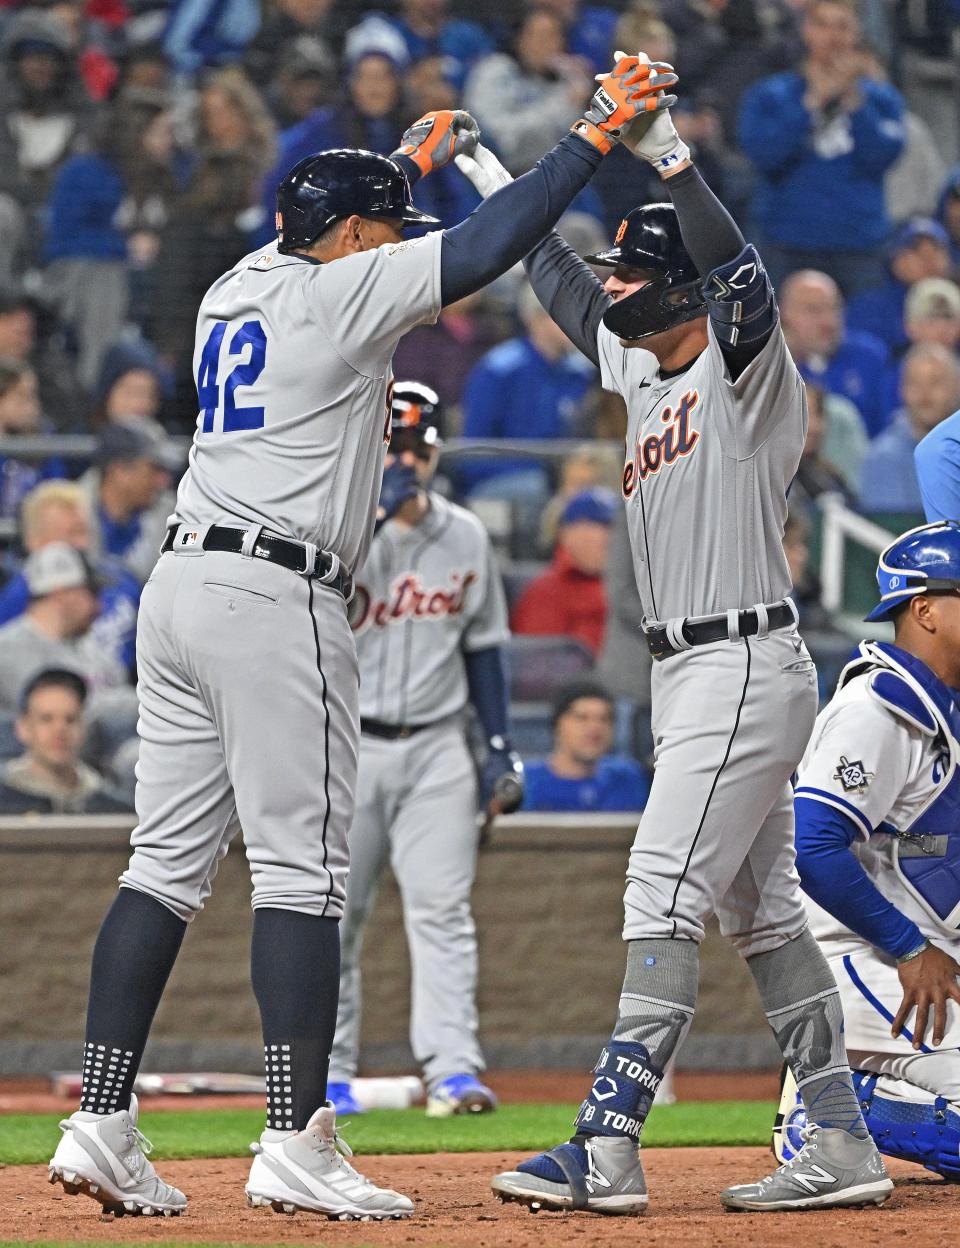 Tigers first baseman Spencer Torkelson (right) celebrates with Miguel Cabrera (left) after hitting a two-run home run during the seventh inning against the Royals at Kauffman Stadium.